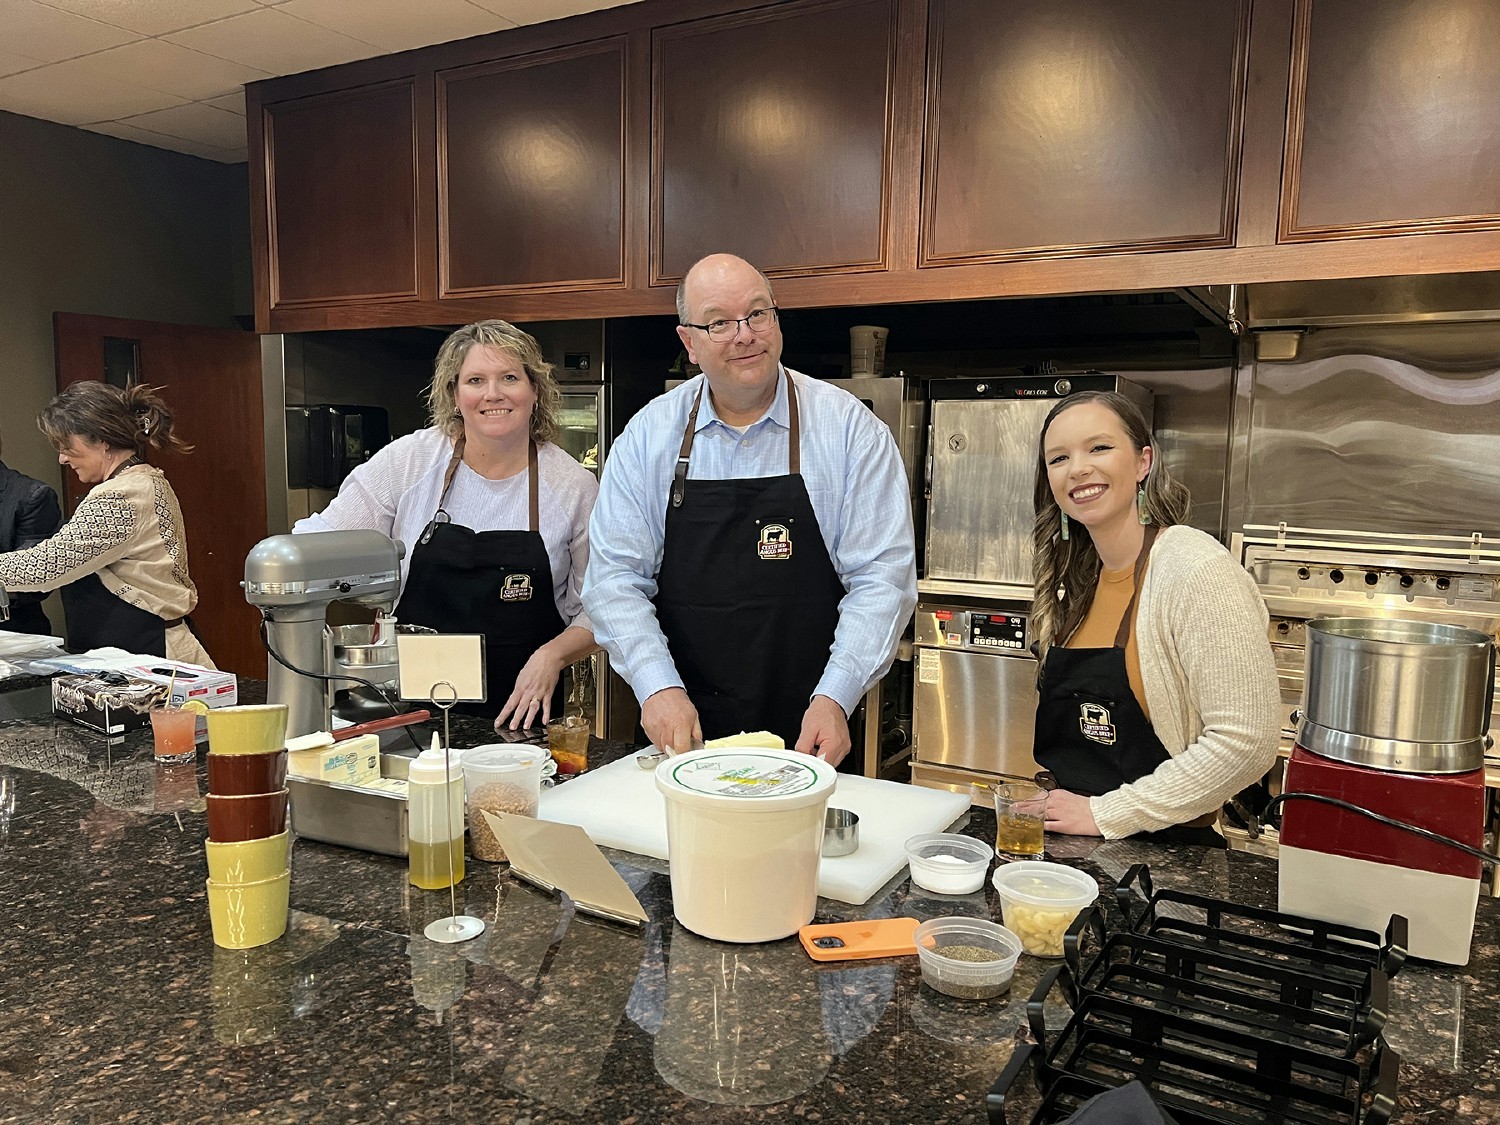 Team-building sessions this year included getting creative in the kitchen with the leadership team